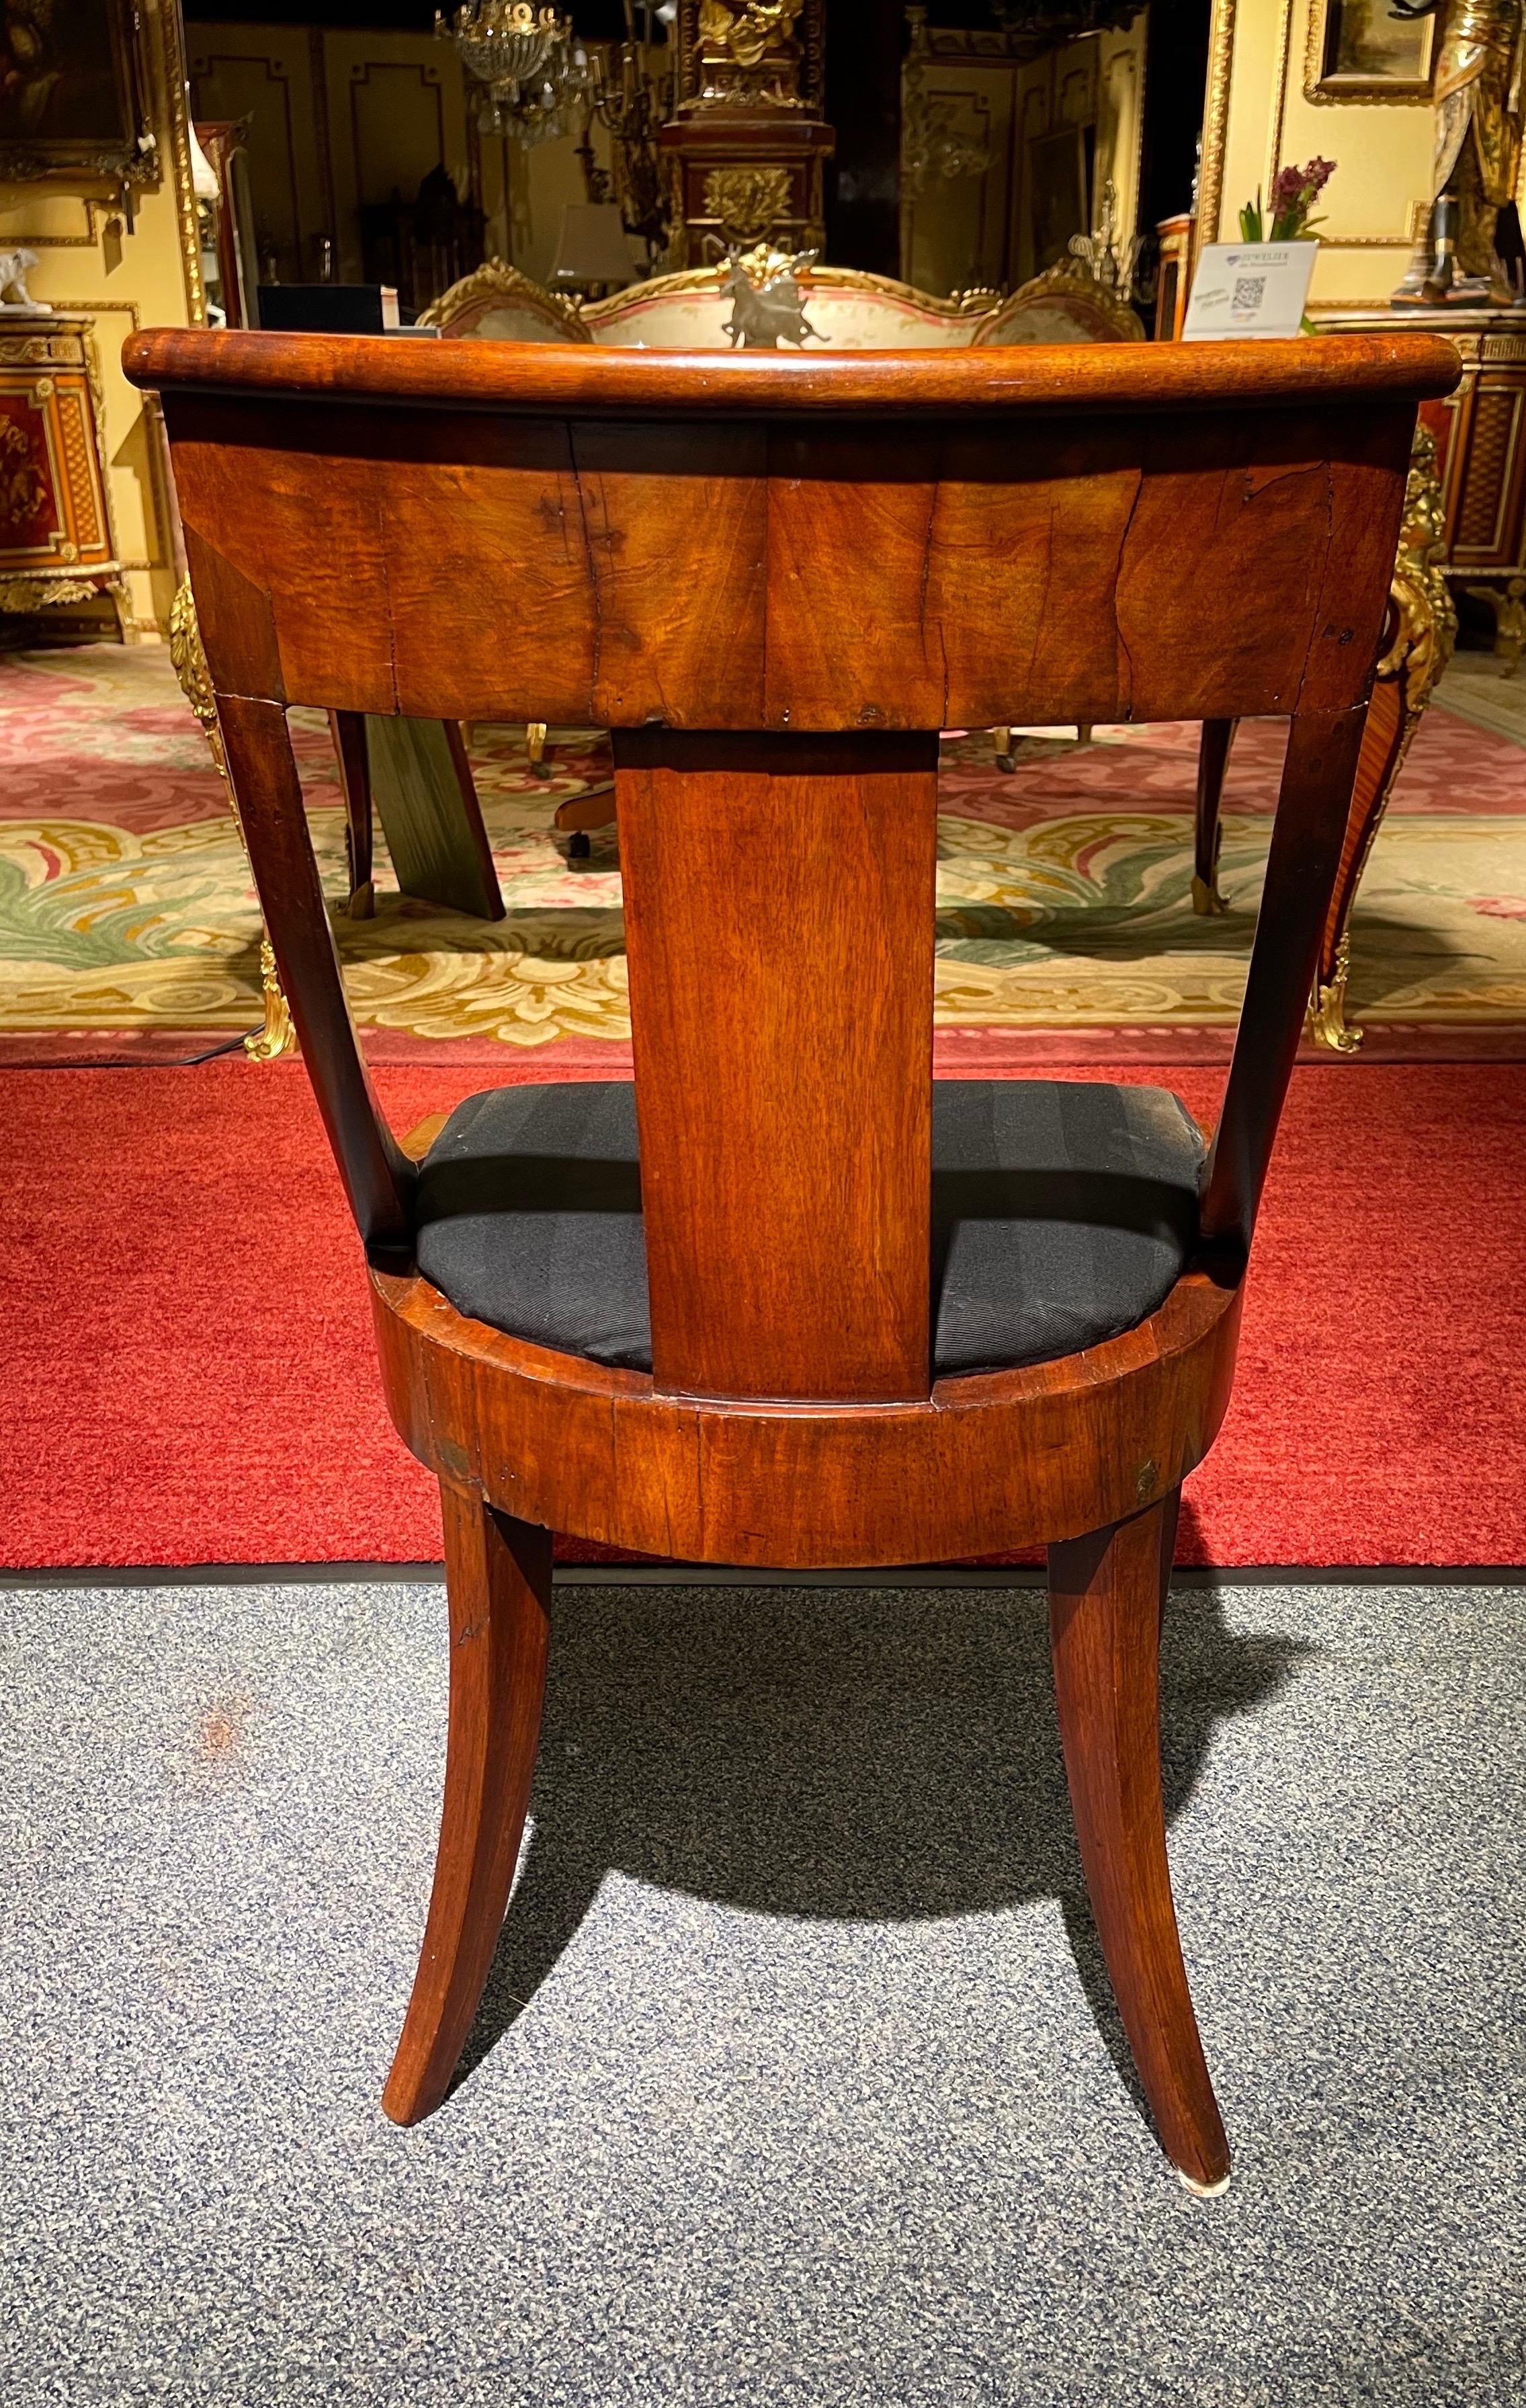 Mahogany Antique Empire Chairs from Around 1810-1815 For Sale